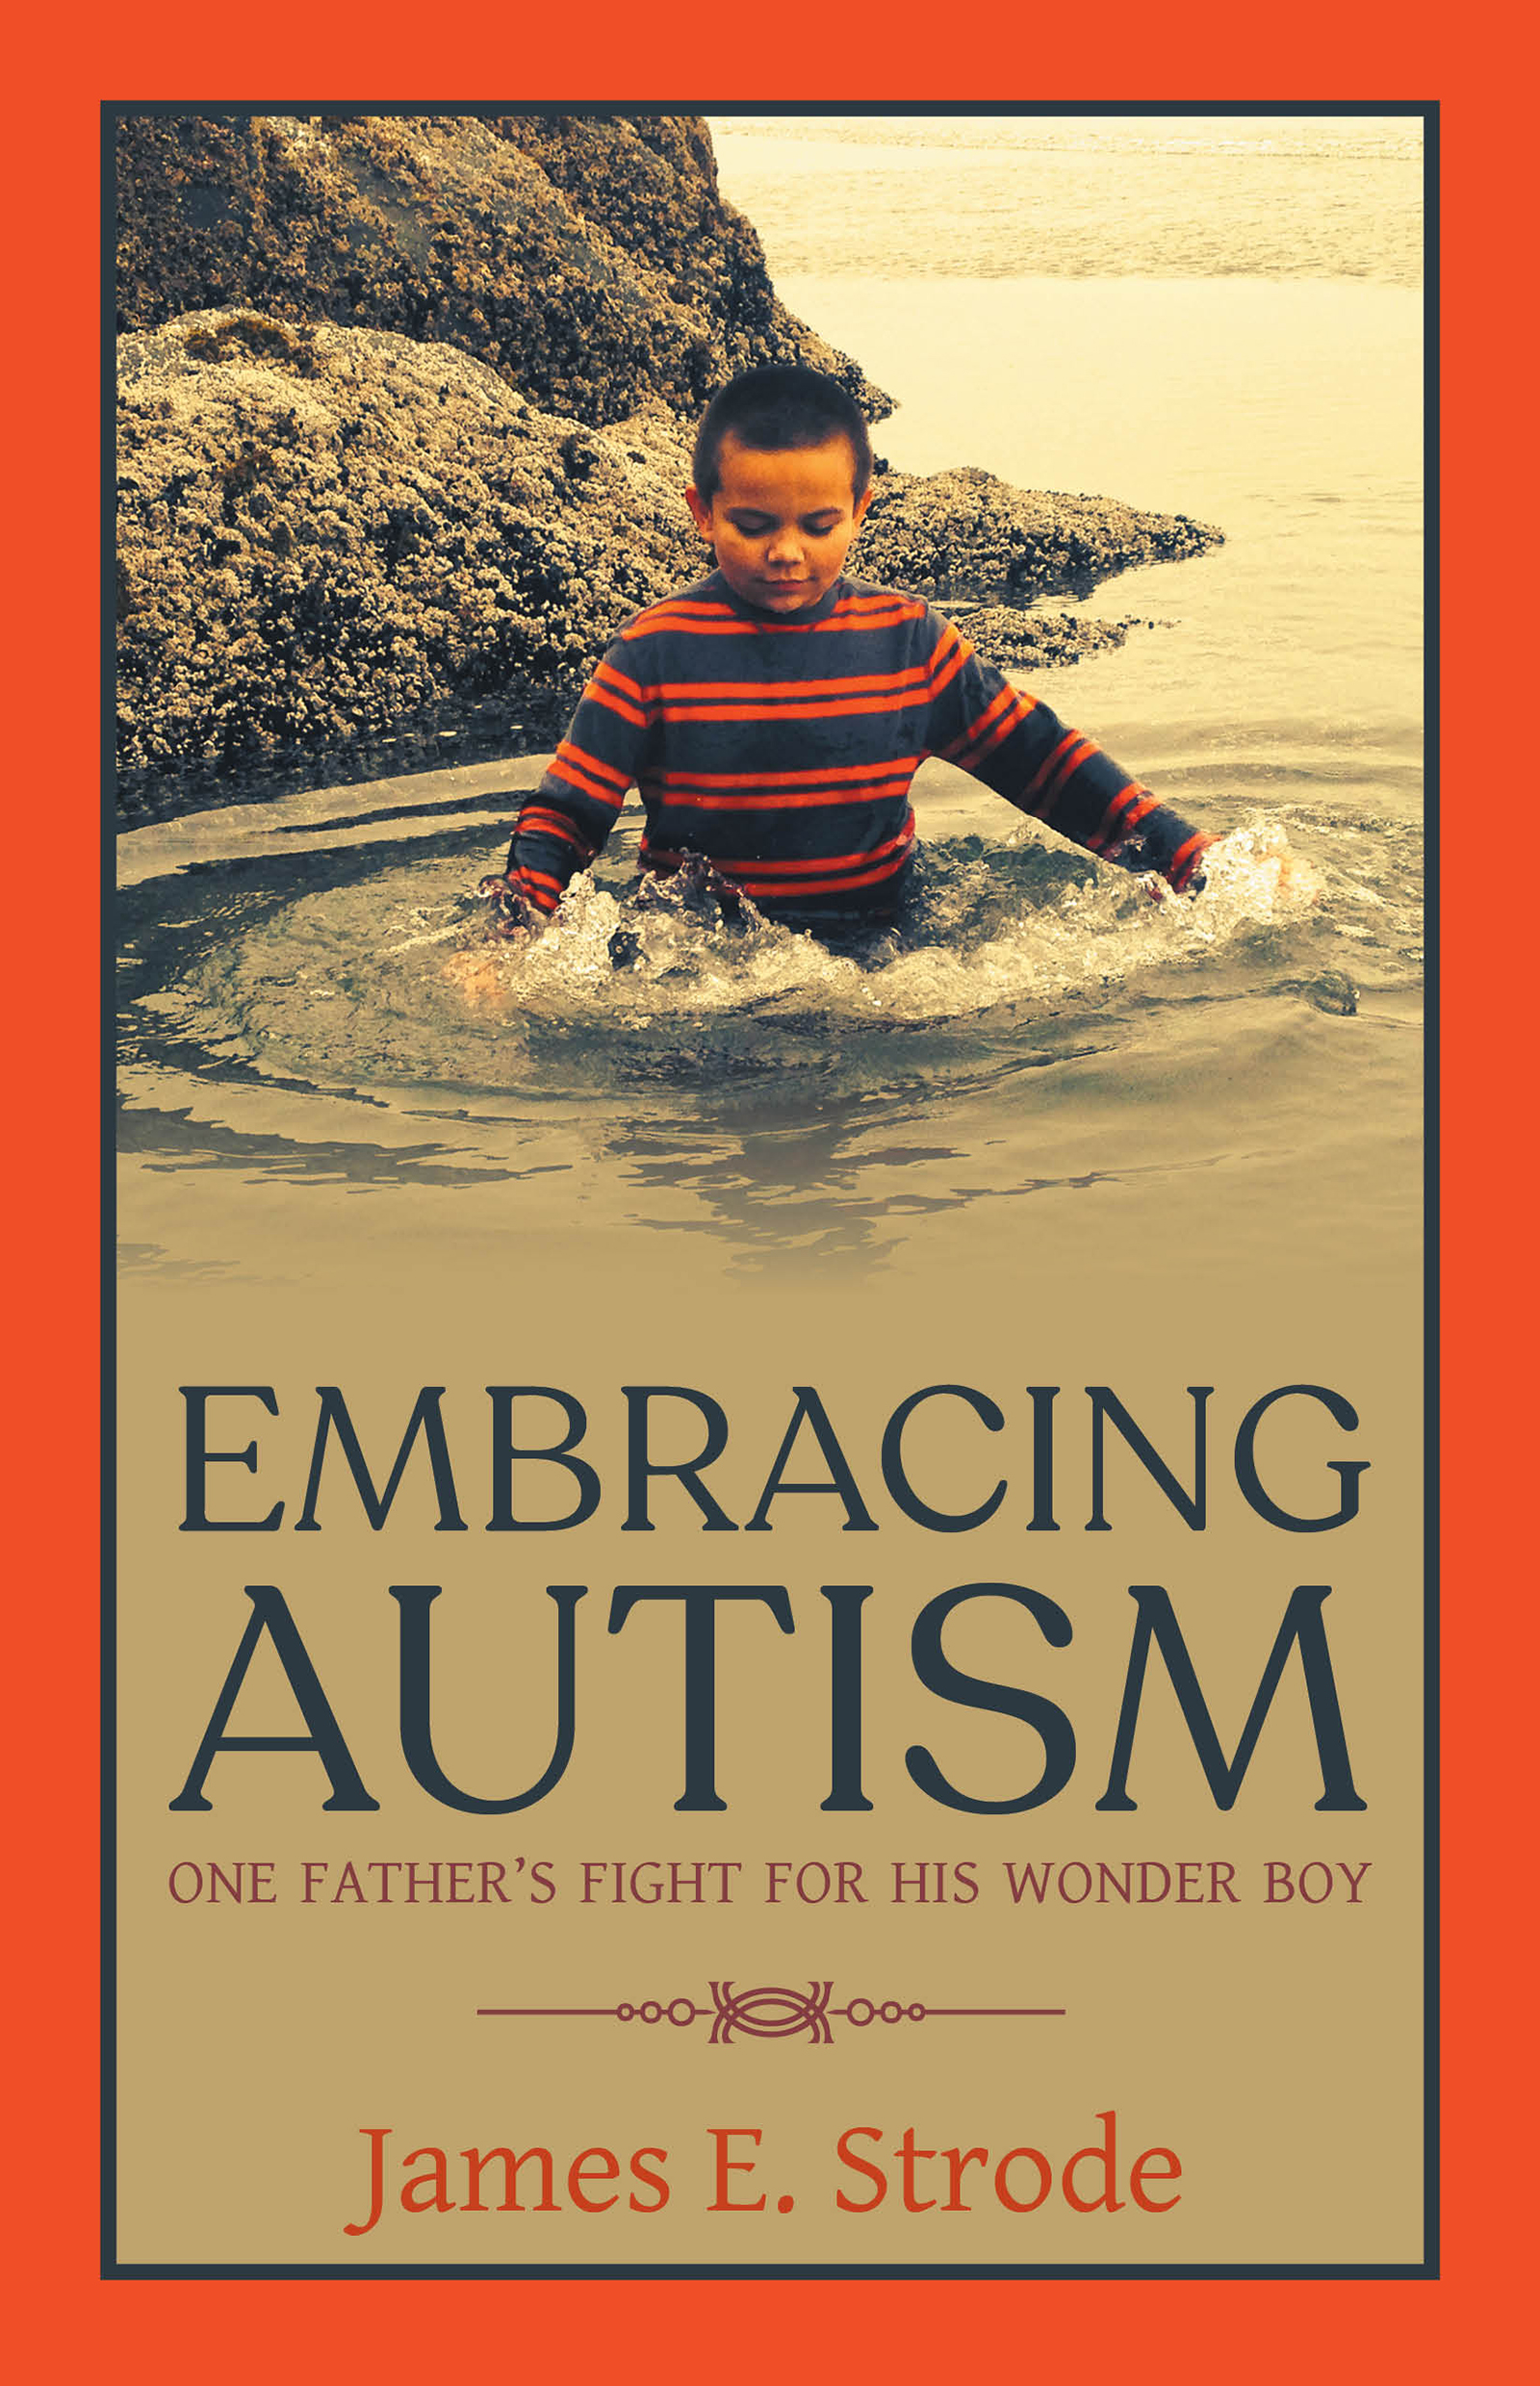 Dive deep into James E. Strode’s psyche with his book ‘Embracing Autism: One Father's Fight for His Wonder Boy’